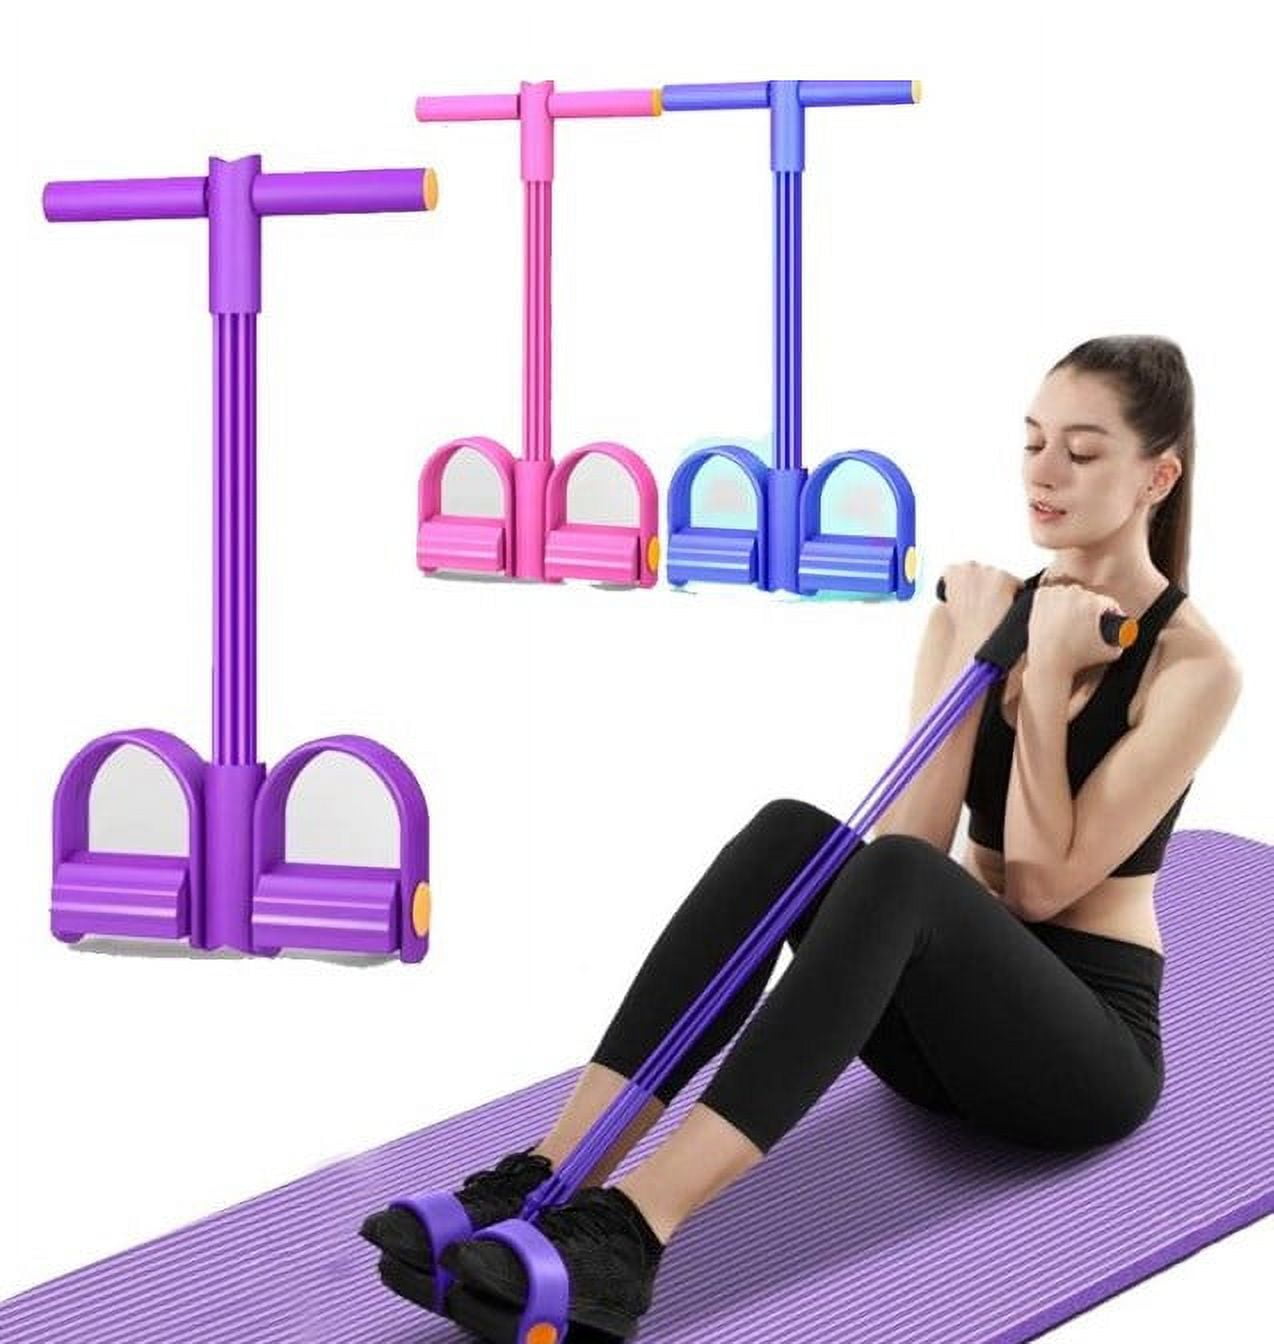 Multifunction Tension Rope, 6-Tube Elastic Yoga Pedal Puller Resistance Band, for Waist/Leg Stretching Slimming Training, Pink